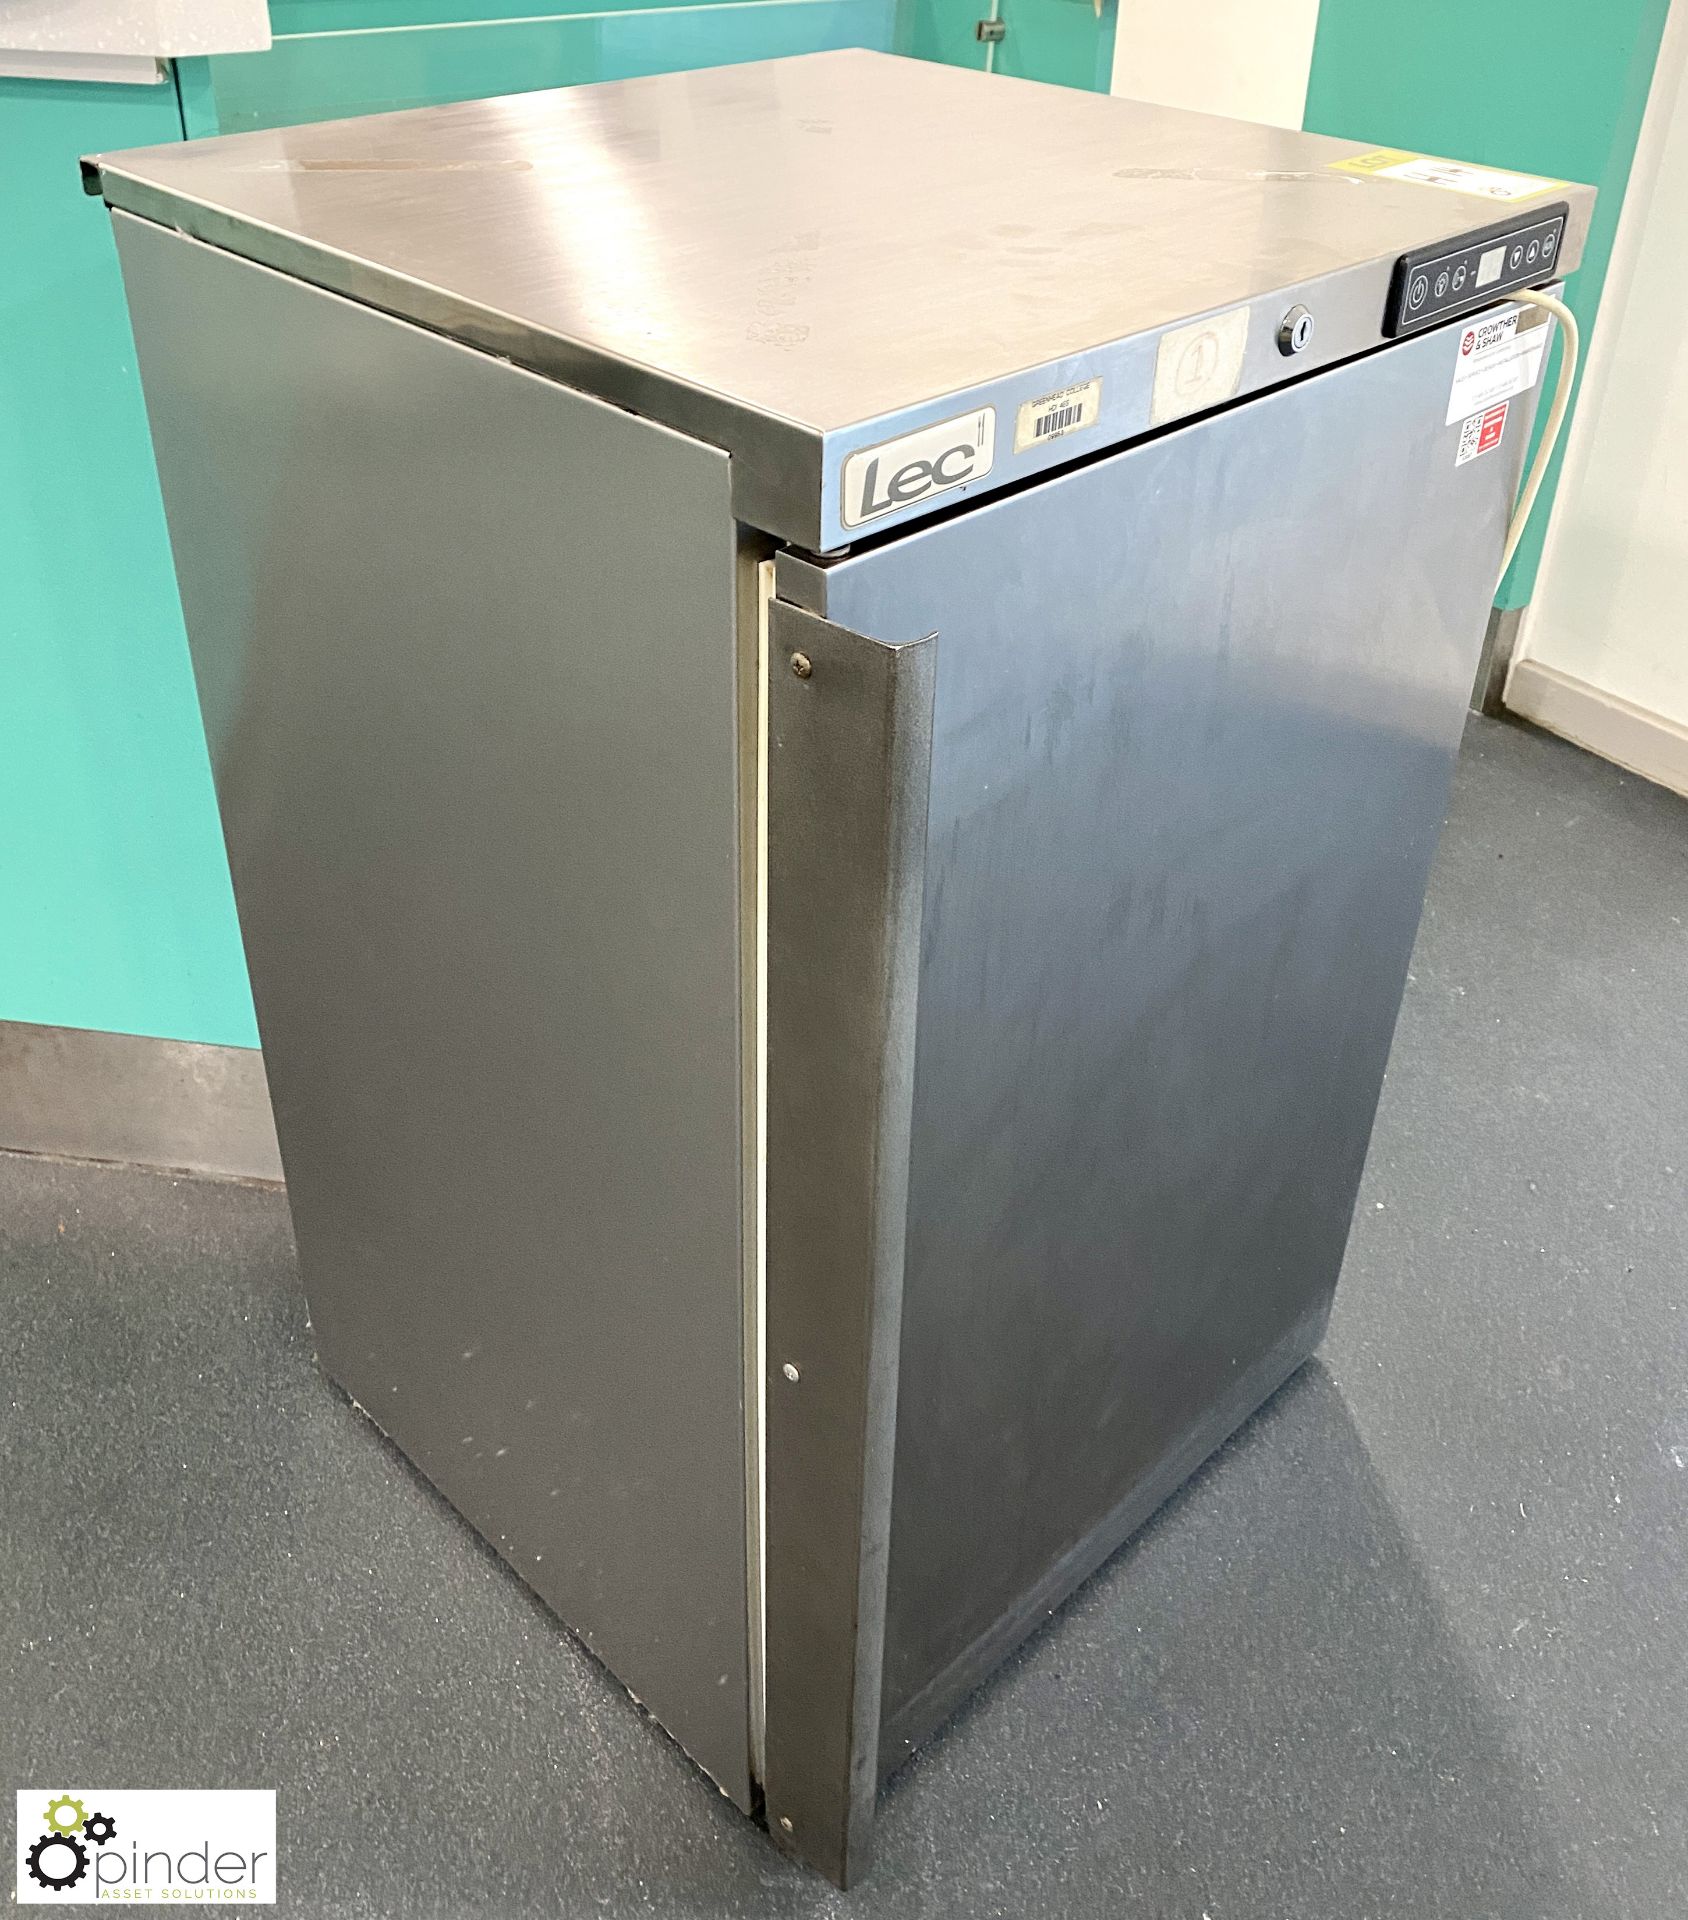 LEC stainless steel undercounter Fridge, 240volts, 560mm x 540mm x 865mm - Image 2 of 4